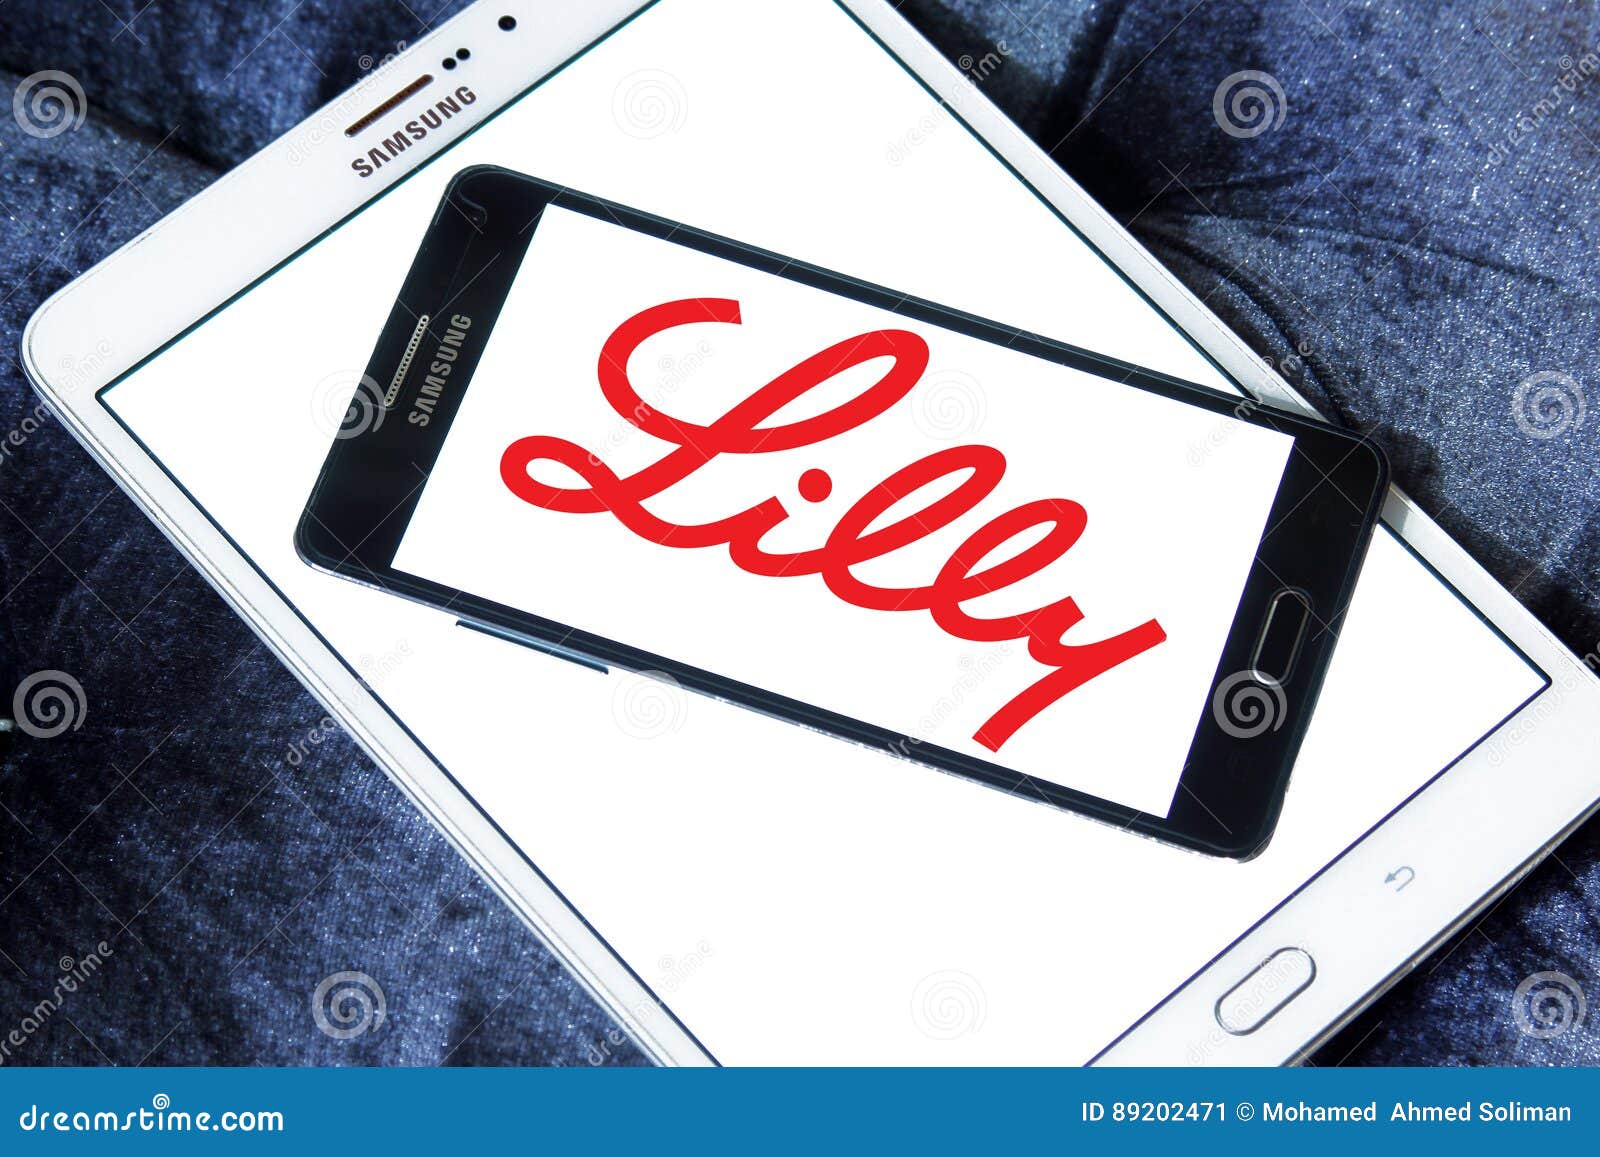 Lilly Pharmaceutical Company Logo Editorial Photo - Image of icons ...